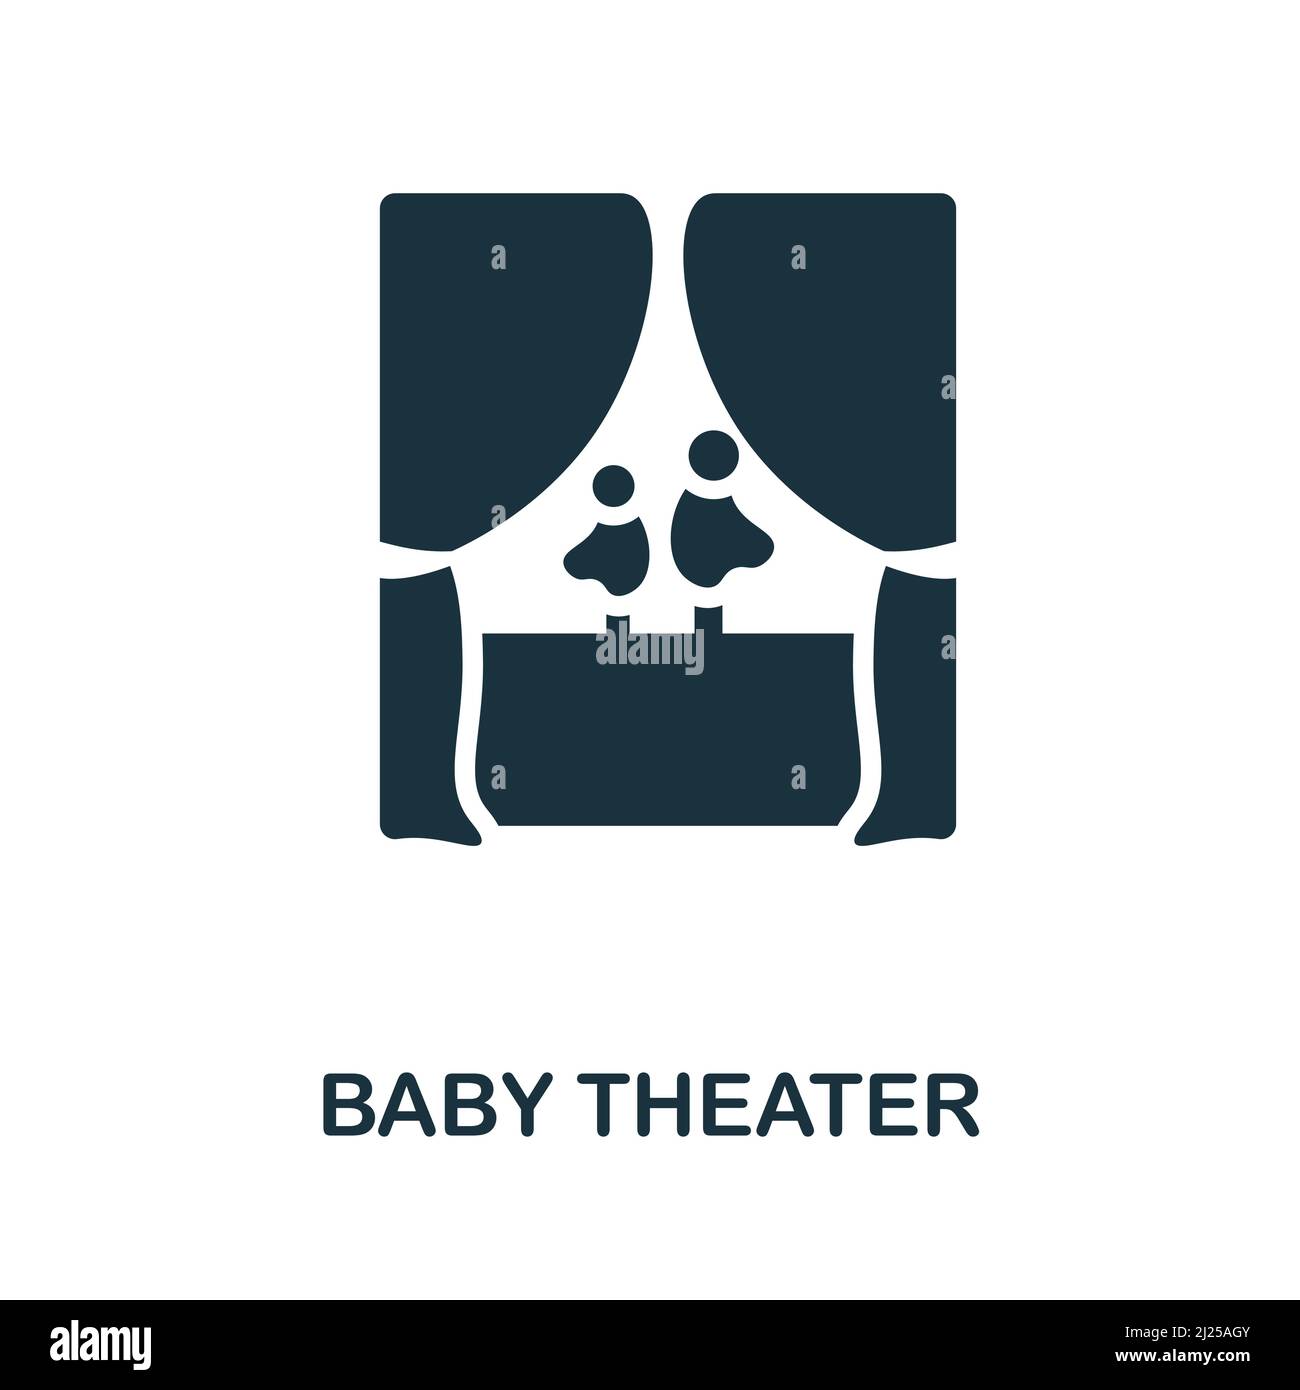 Baby Theater icon. Monochrome simple Baby Theater icon for templates, web design and infographics Stock Vector